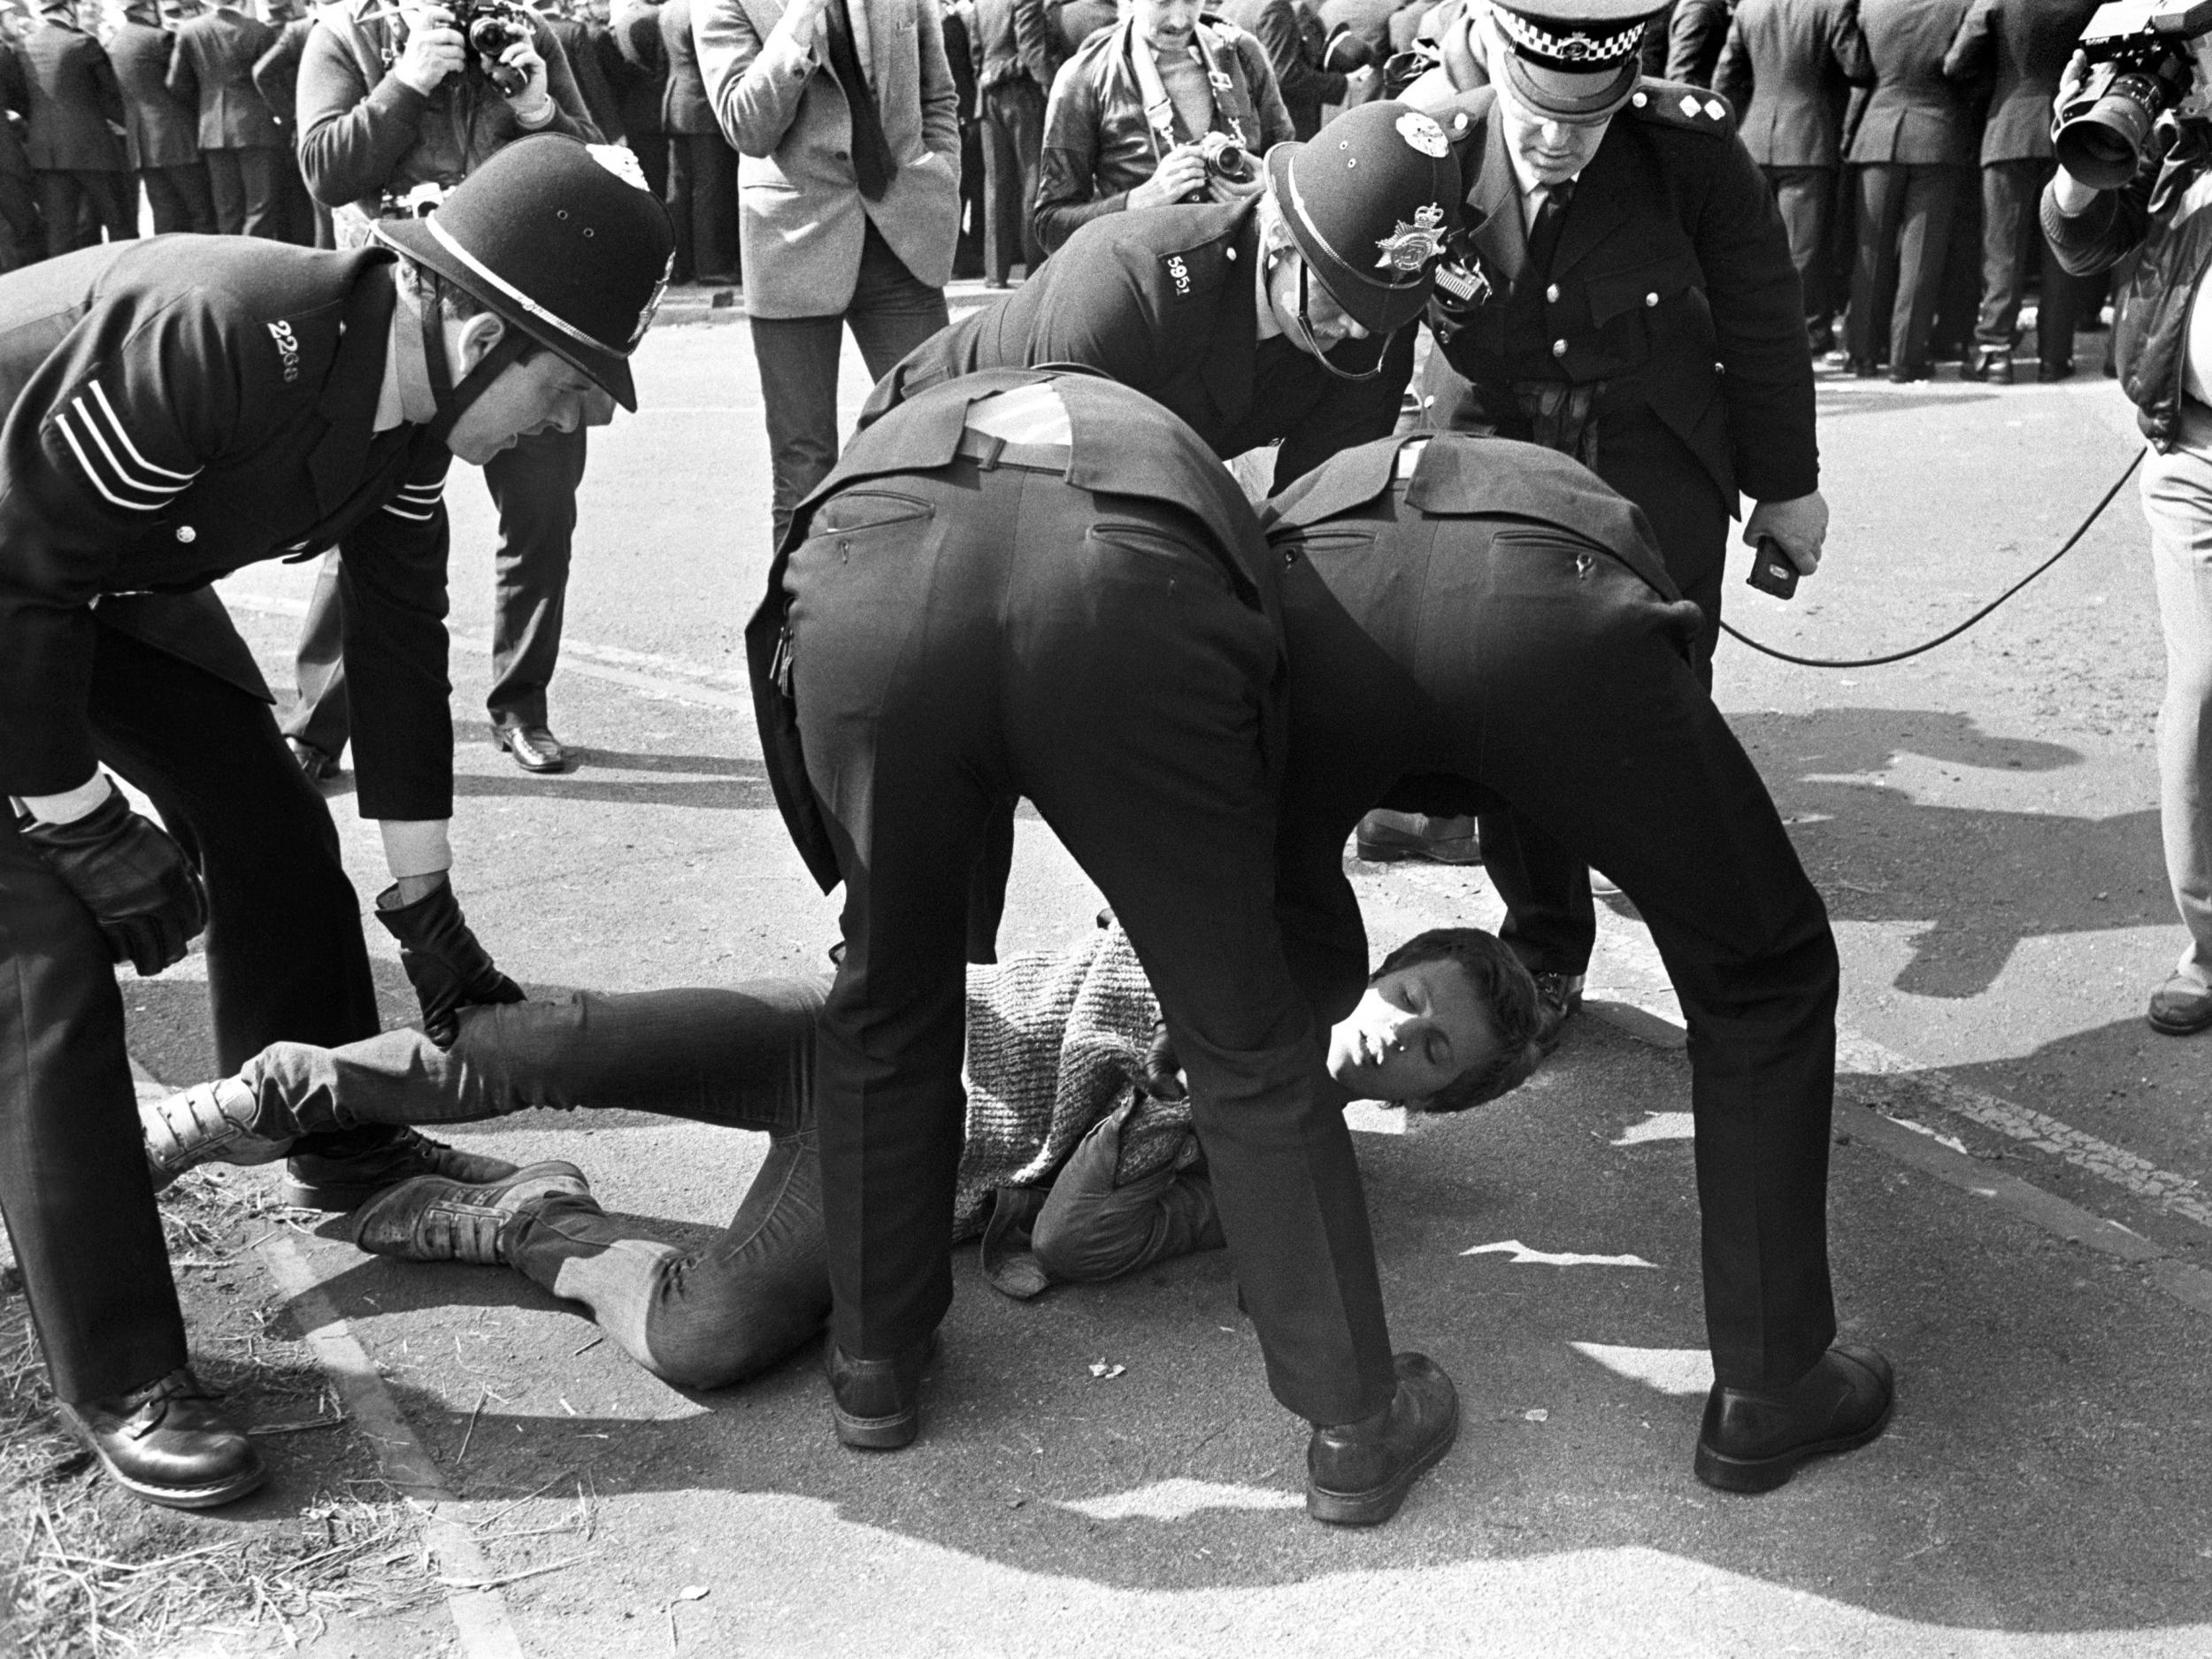 Guests were told to 'expect a confrontation bigger than the Battle of Orgreave'